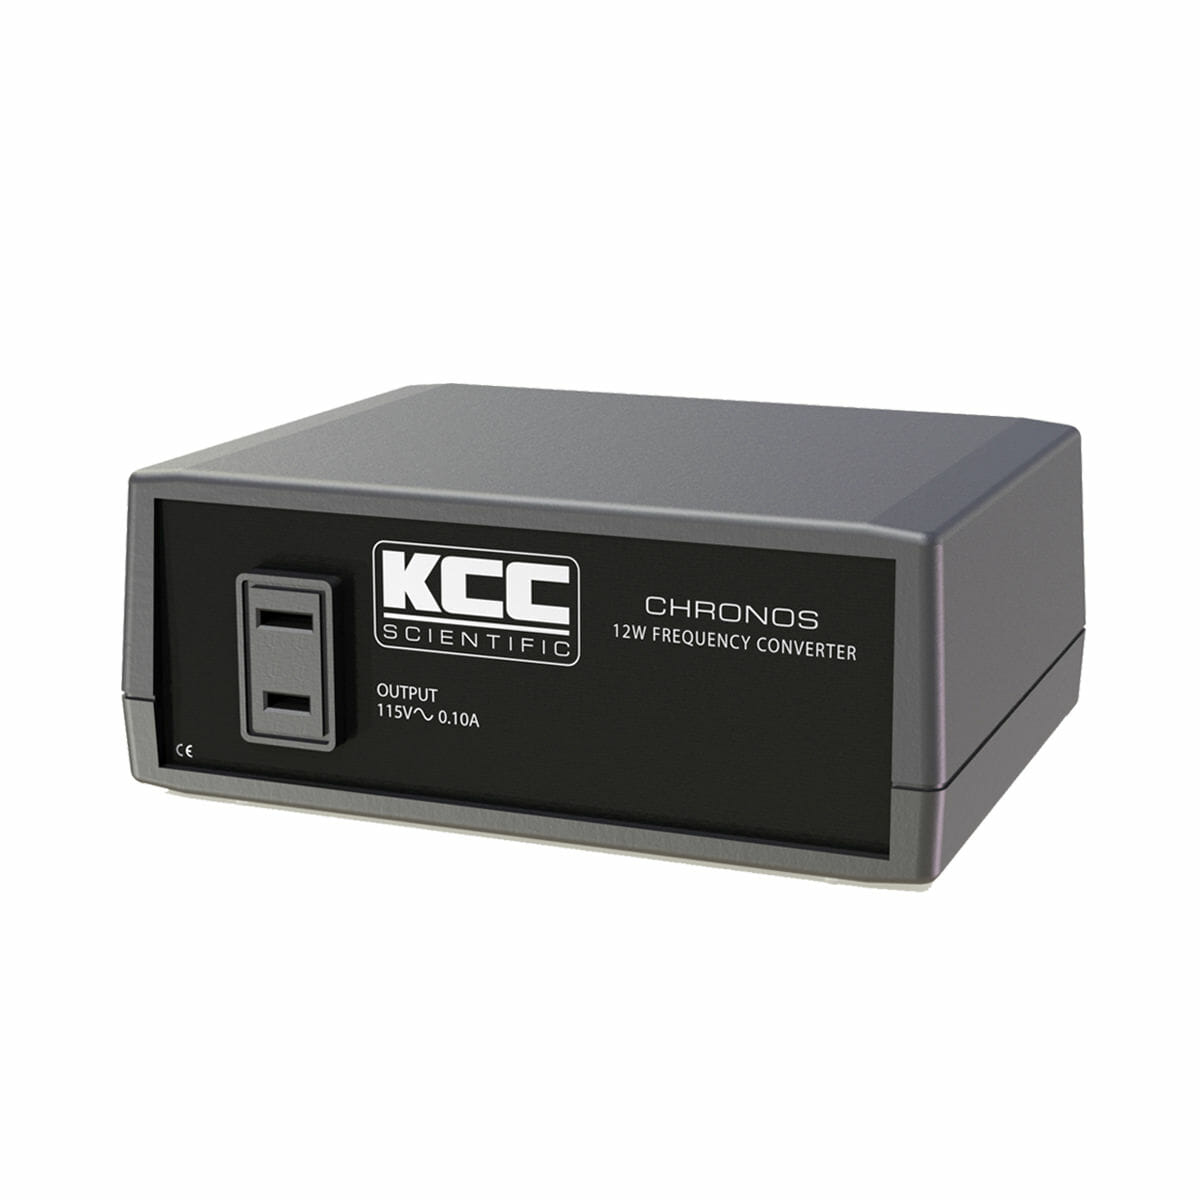 chronos frequency converter -CC Scientific All Products